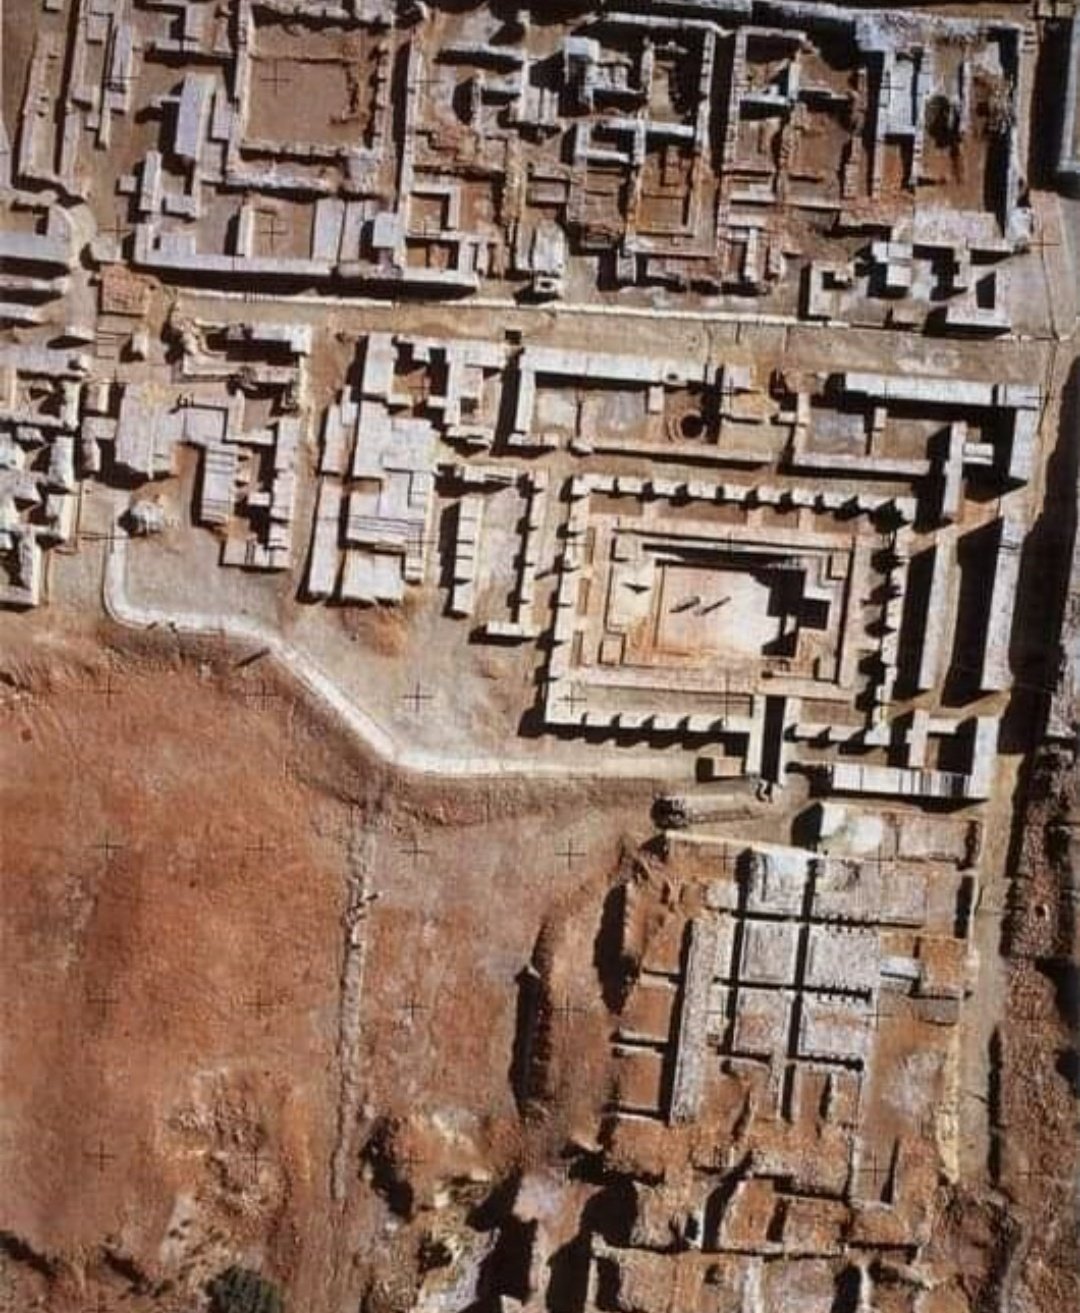 Aerial view of the riins of the ancient city of Mohen Jo Daro, Pakistan